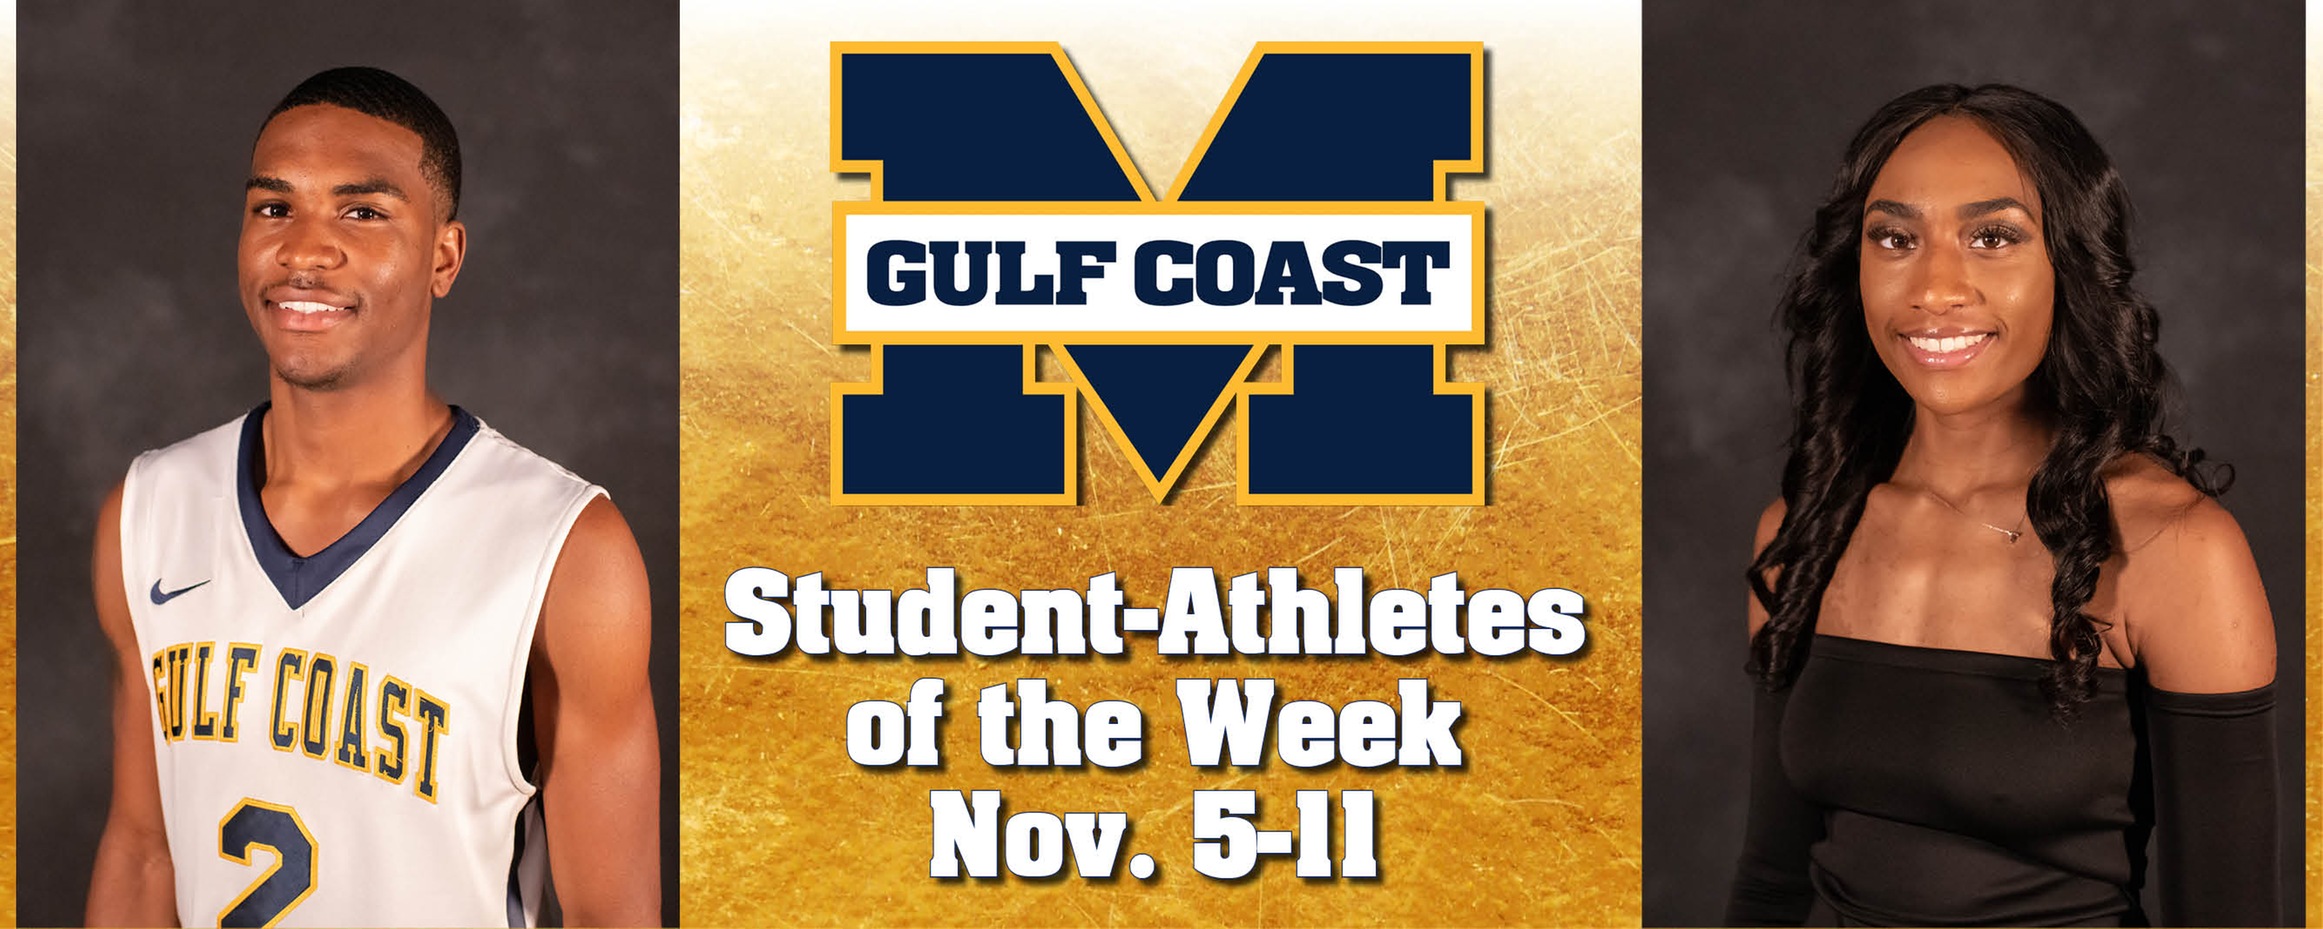 Oney, Thigpen named MGCCC Student-Athletes of the Week